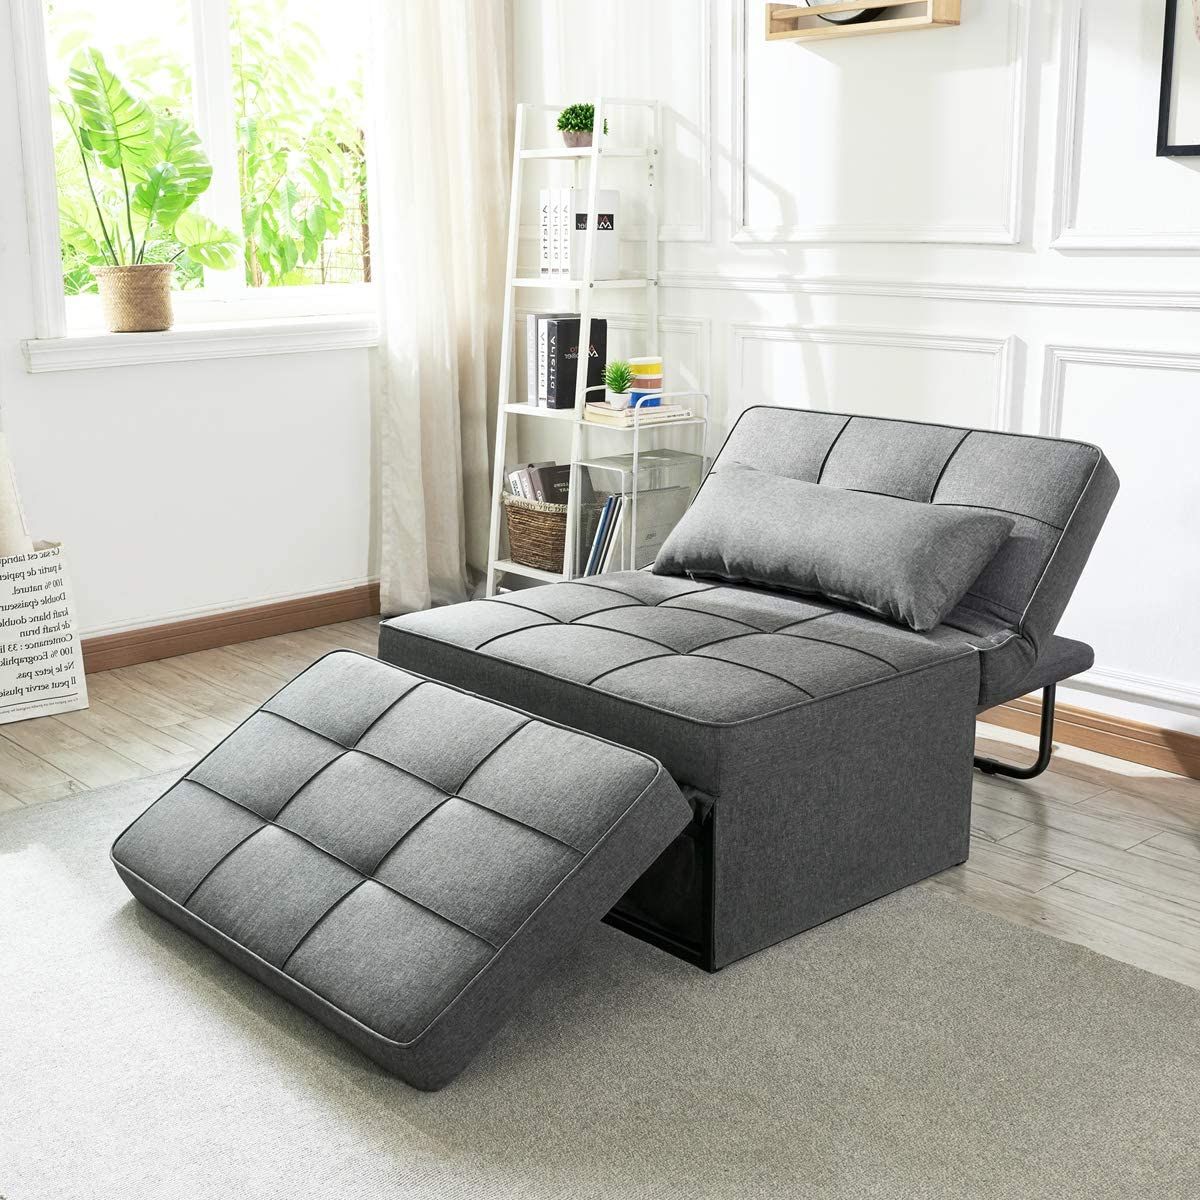 Best And Newest Sleeper Ottomans Throughout Vonanda Sofa Bed, Convertible Chair 4 In 1 Multi Function Folding Ottoman  Modern Breathable Linen Guest Bed With Adjustable Sleeper For Small Room  Apartment, Dark Gray : Amazon.co (View 7 of 10)